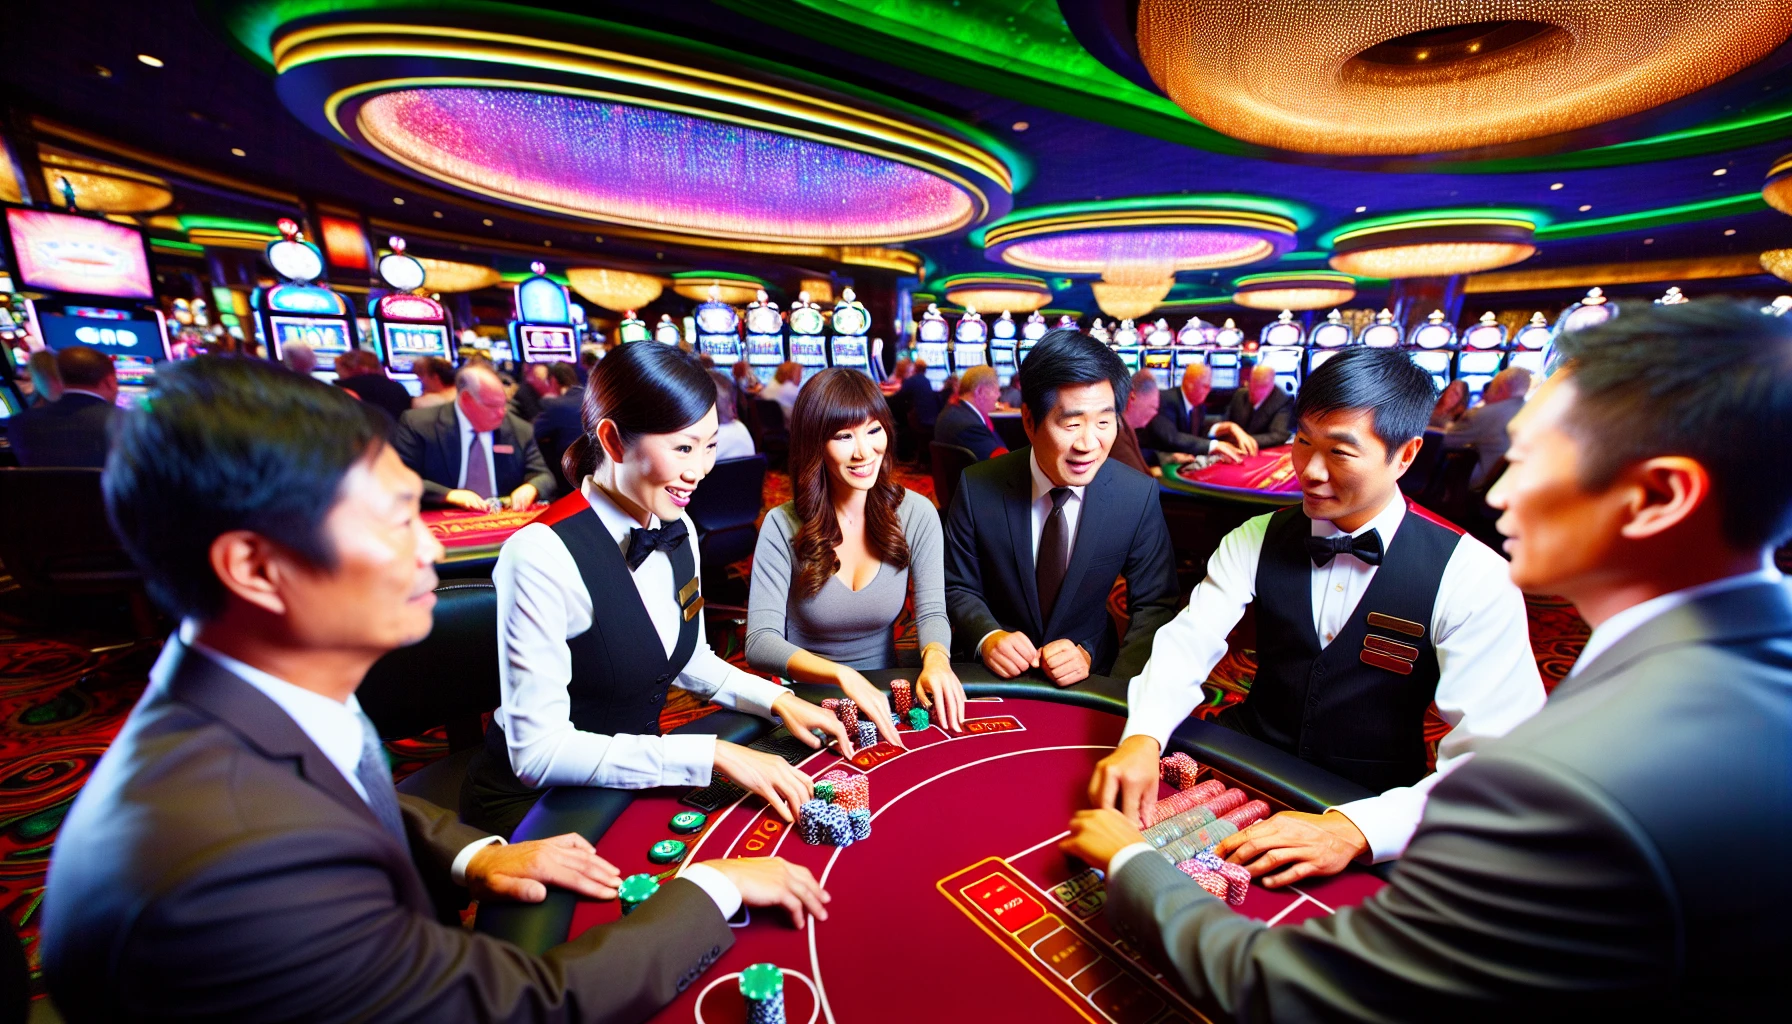 A diverse group of casino dealers at a gaming table